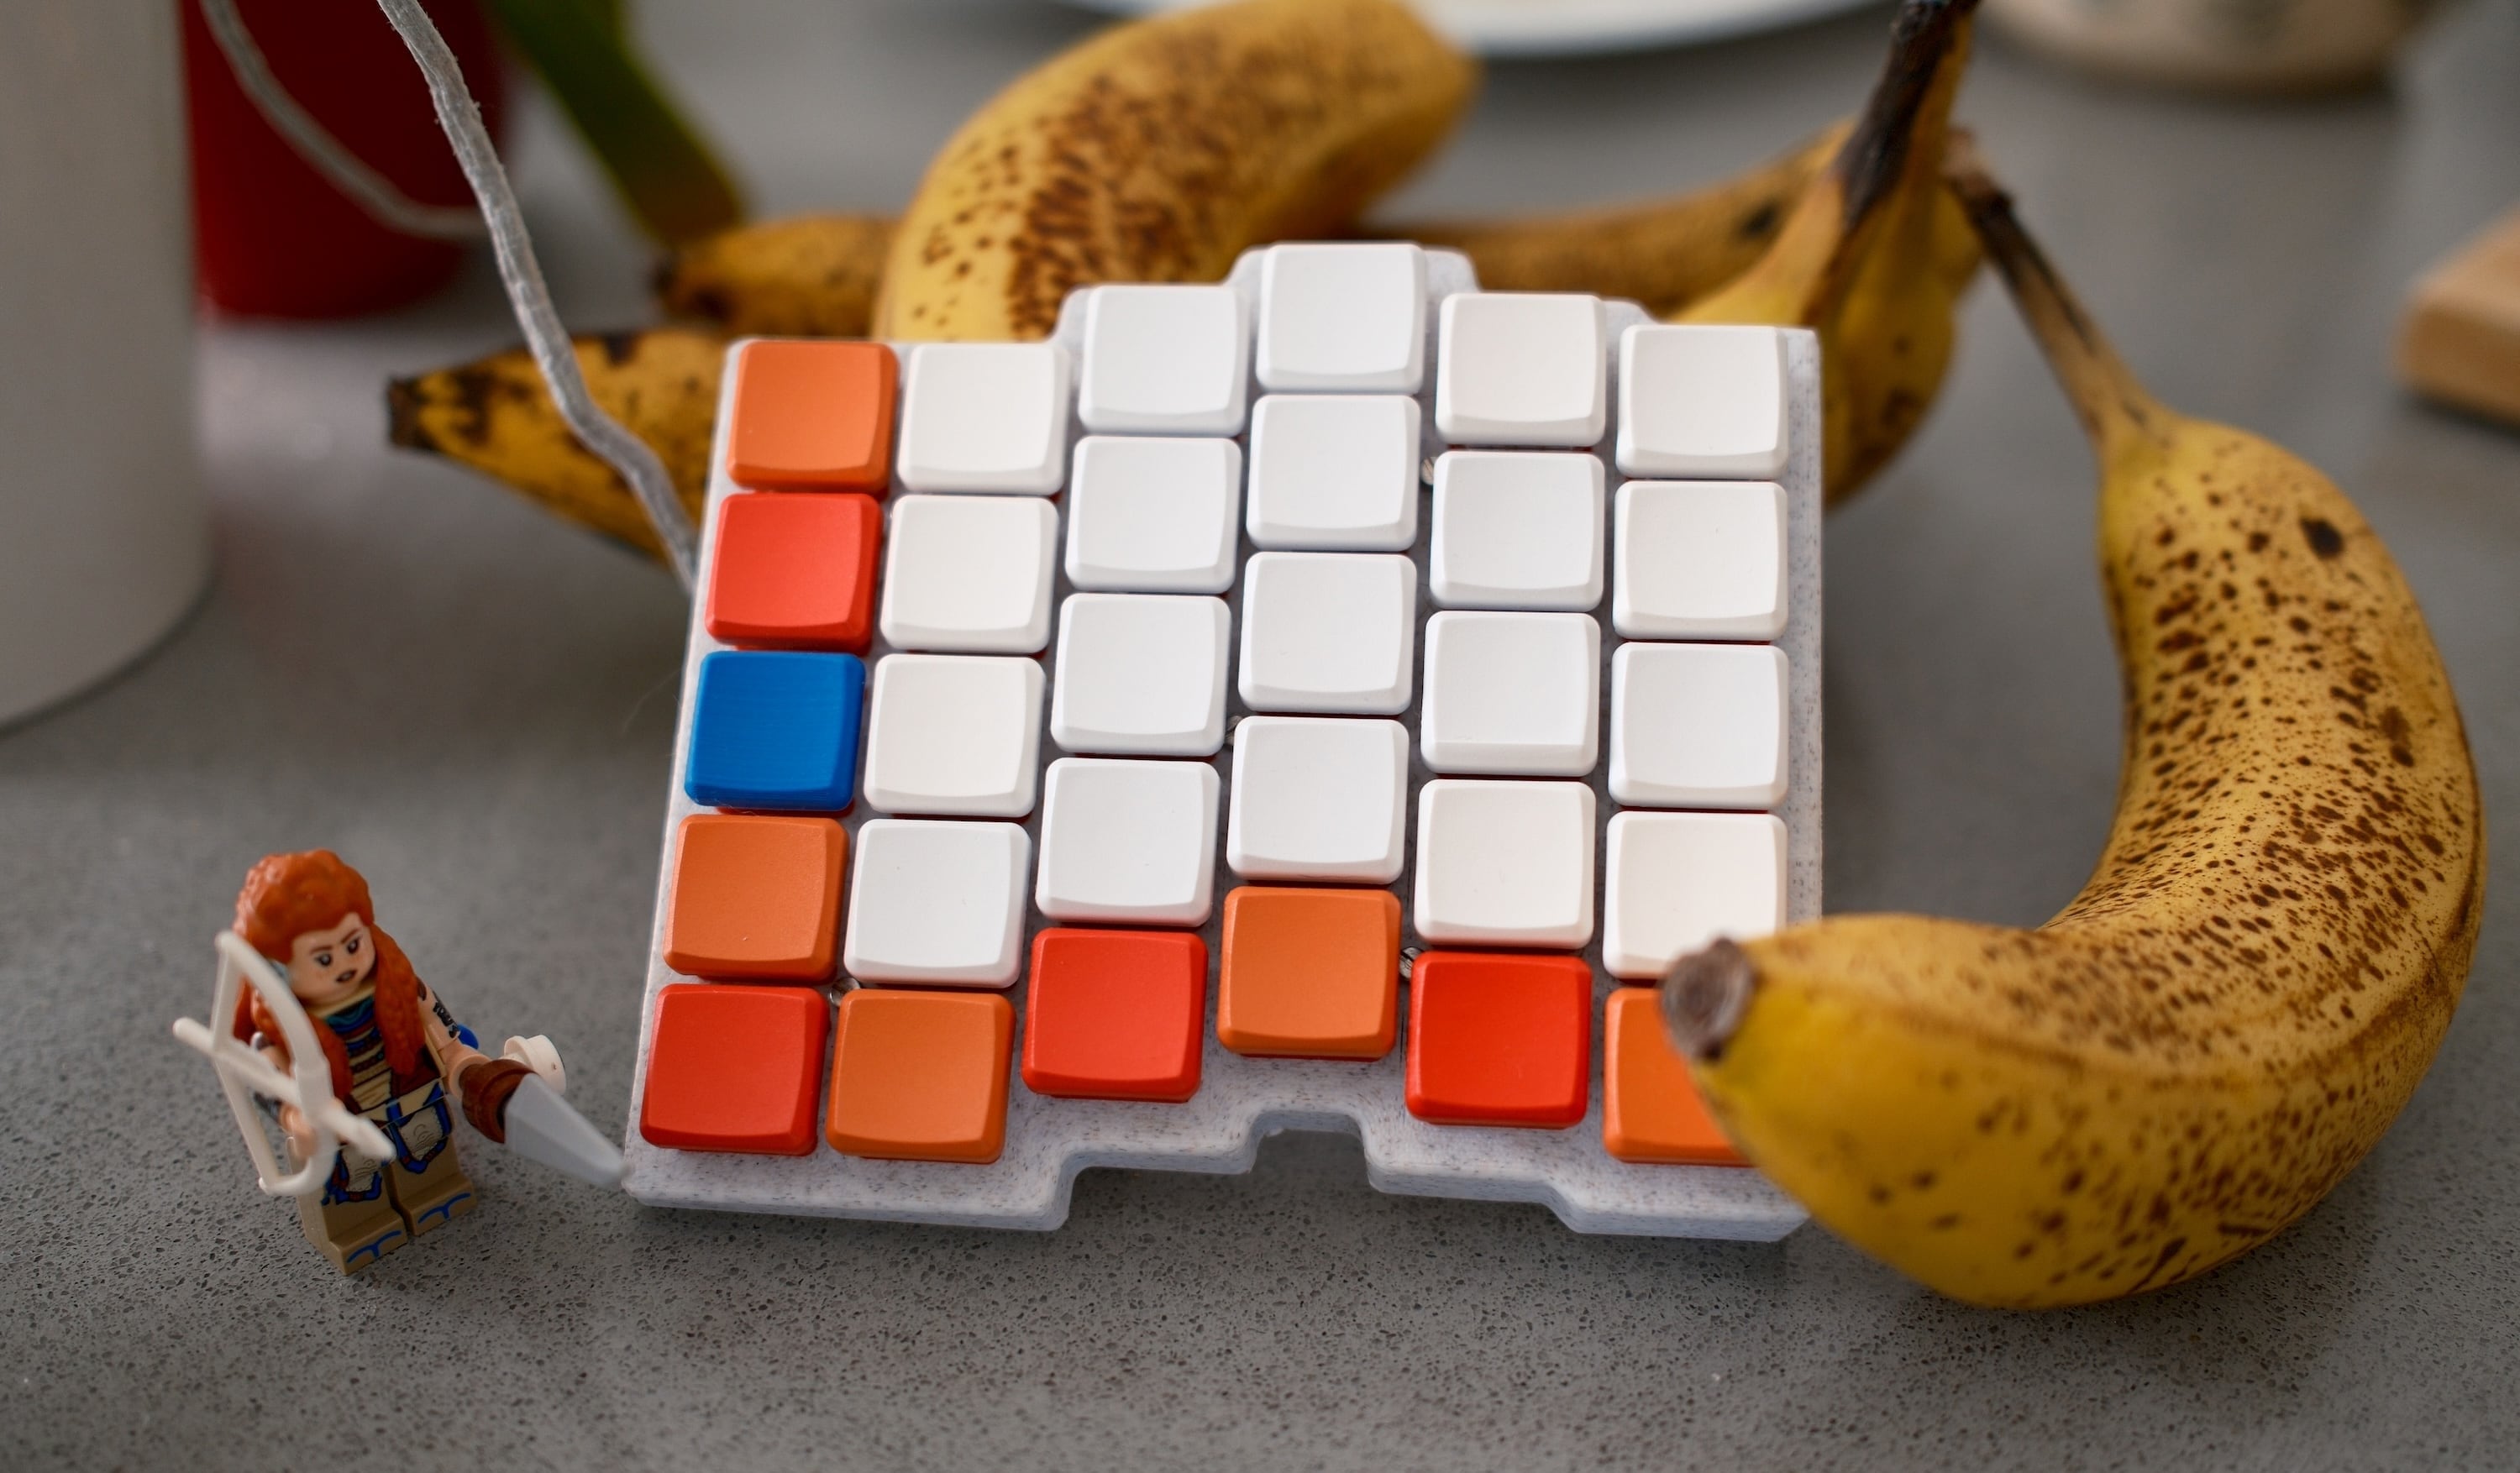 The Caldera keyboard on a kitchen island with bananas around it and a LEGO figurine of Aloy from Horizon Zero Dawn